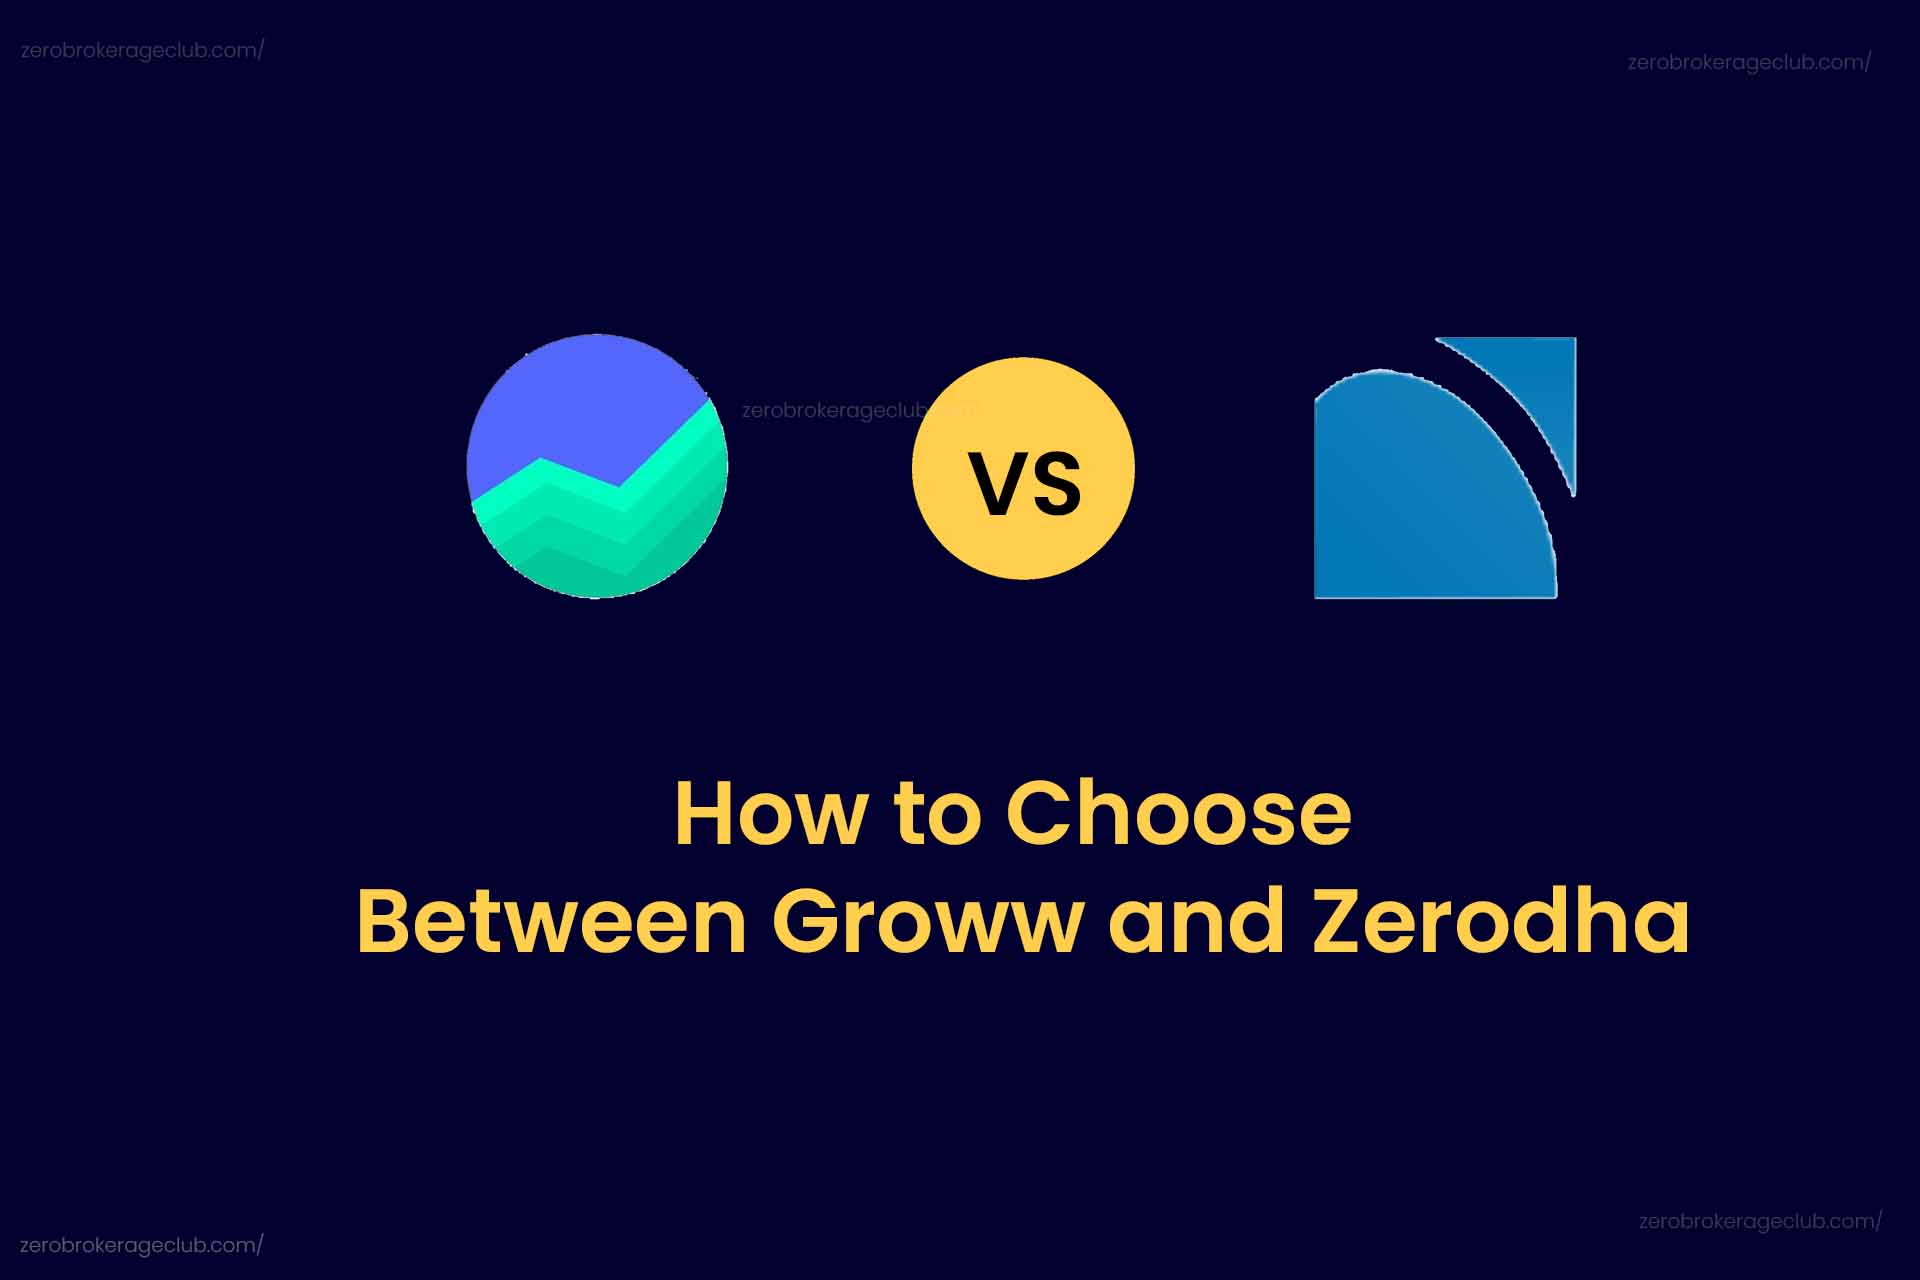 How to Choose Between Groww and Zerodha